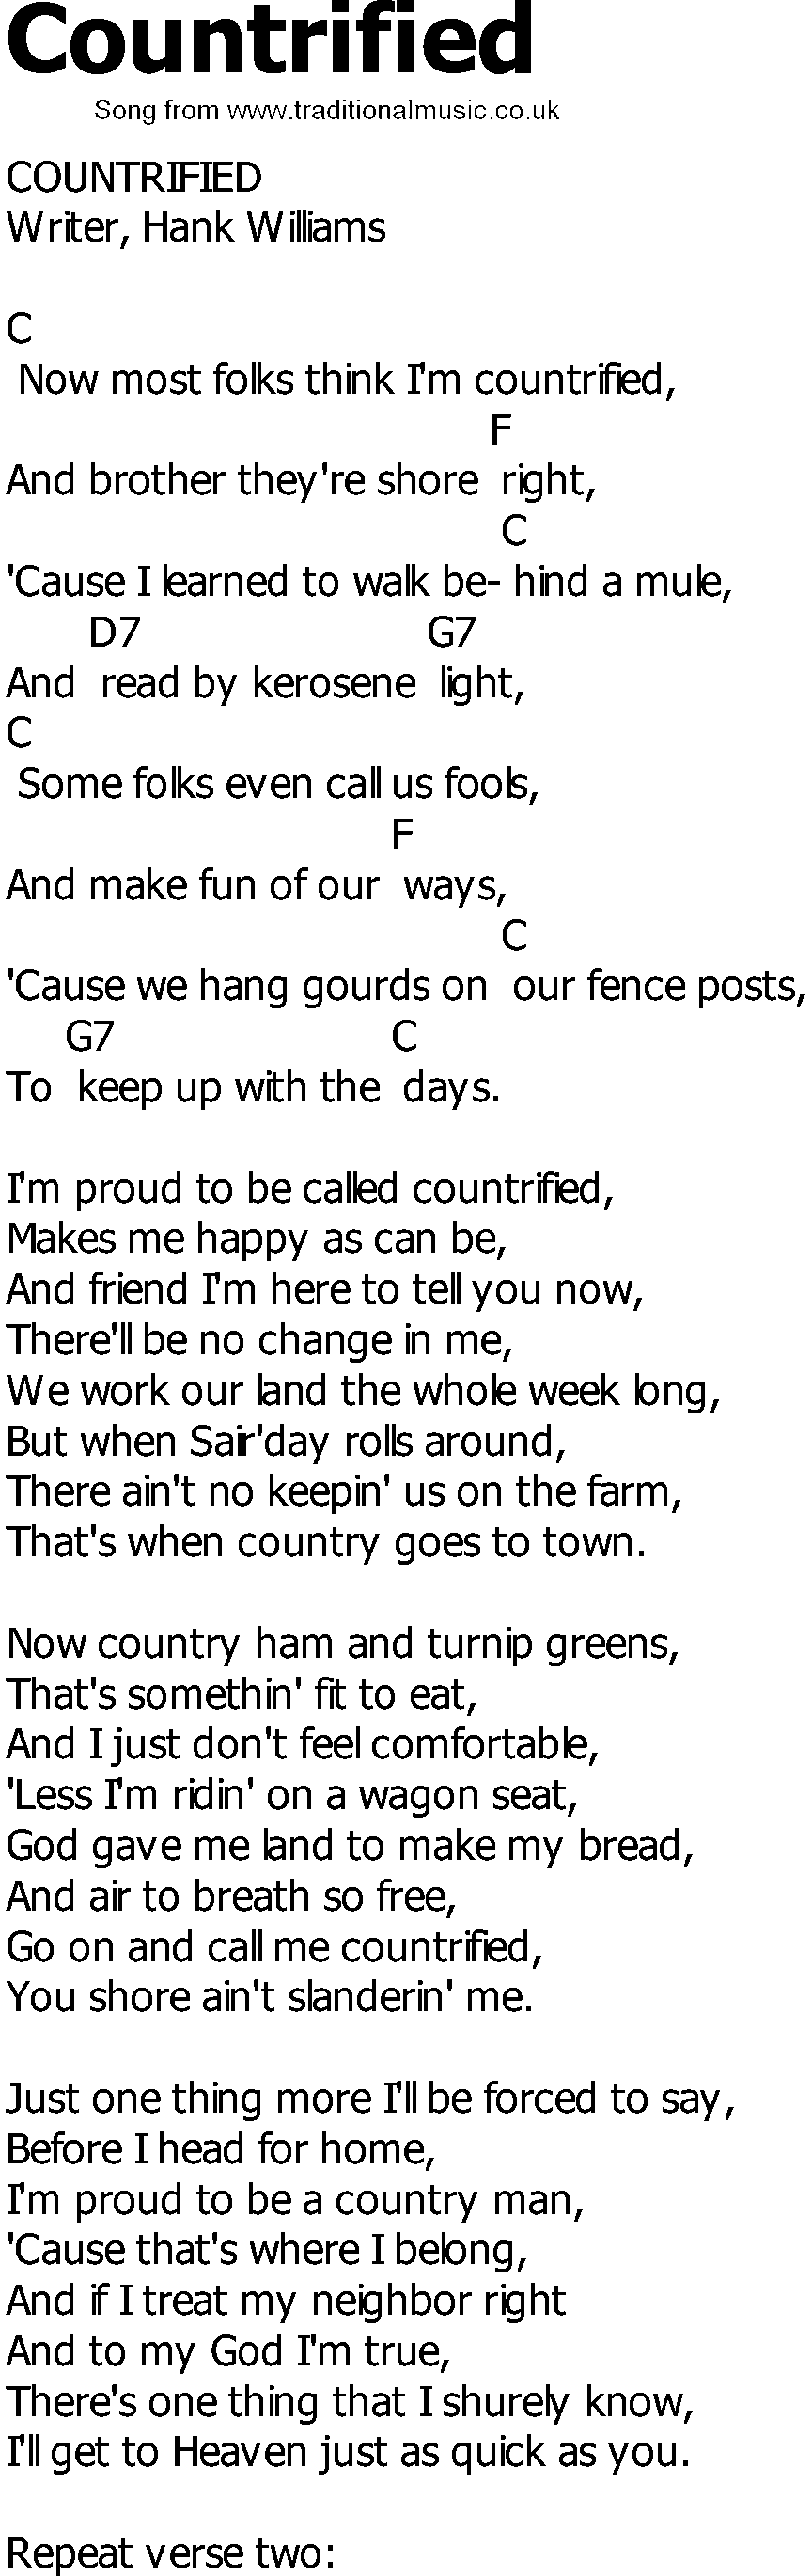 Old Country song lyrics with chords - Countrified